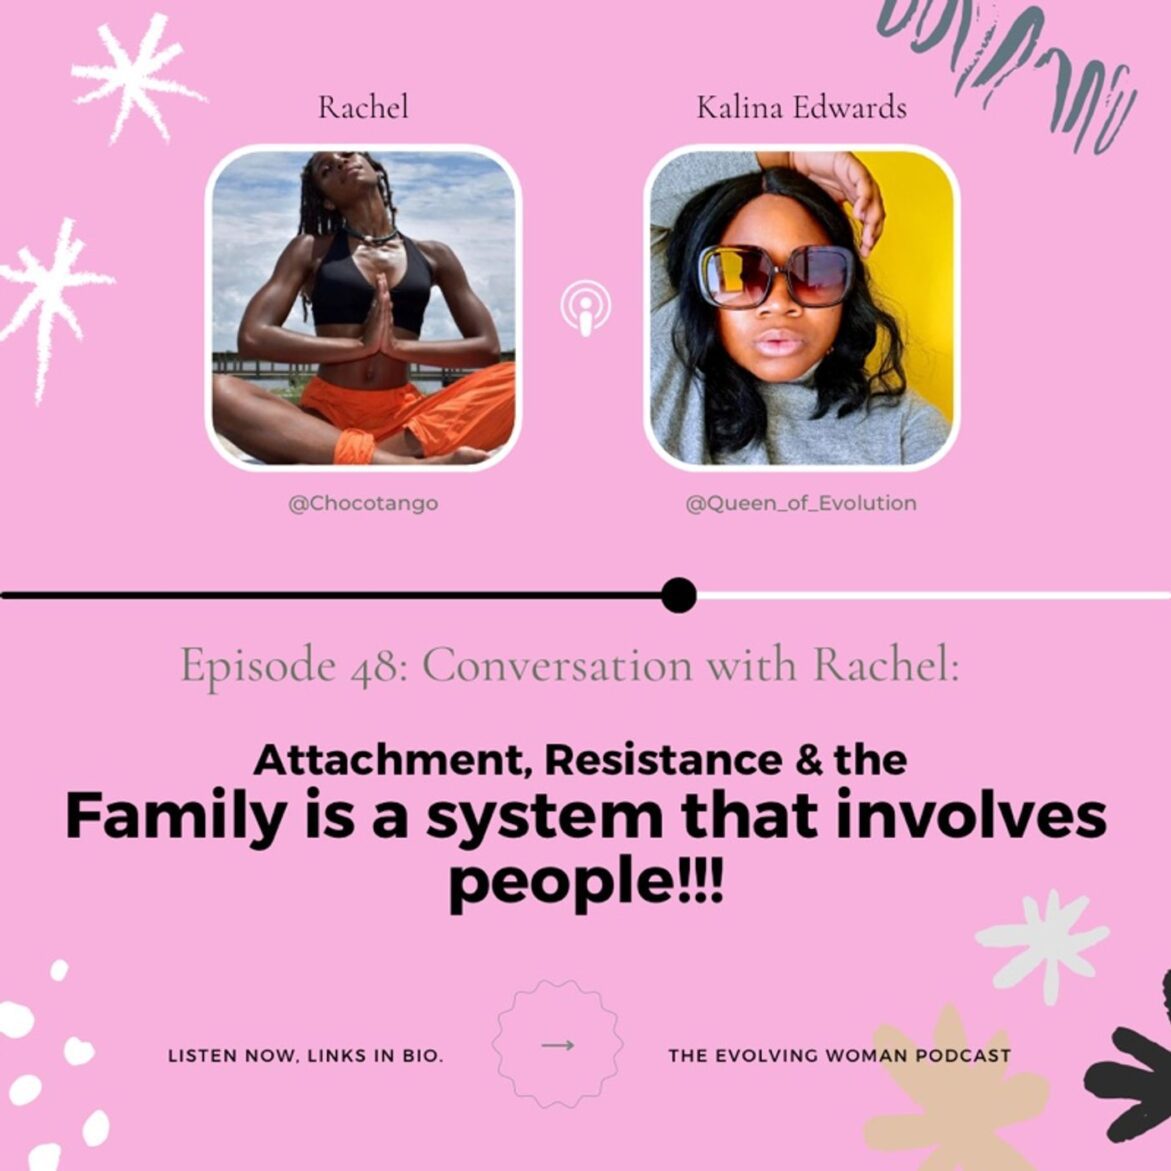 Black Podcasting - Episode 48: Conversation with Rachel (@ChocoTango): Attachments, Resistance & the Family is a system that involves people!